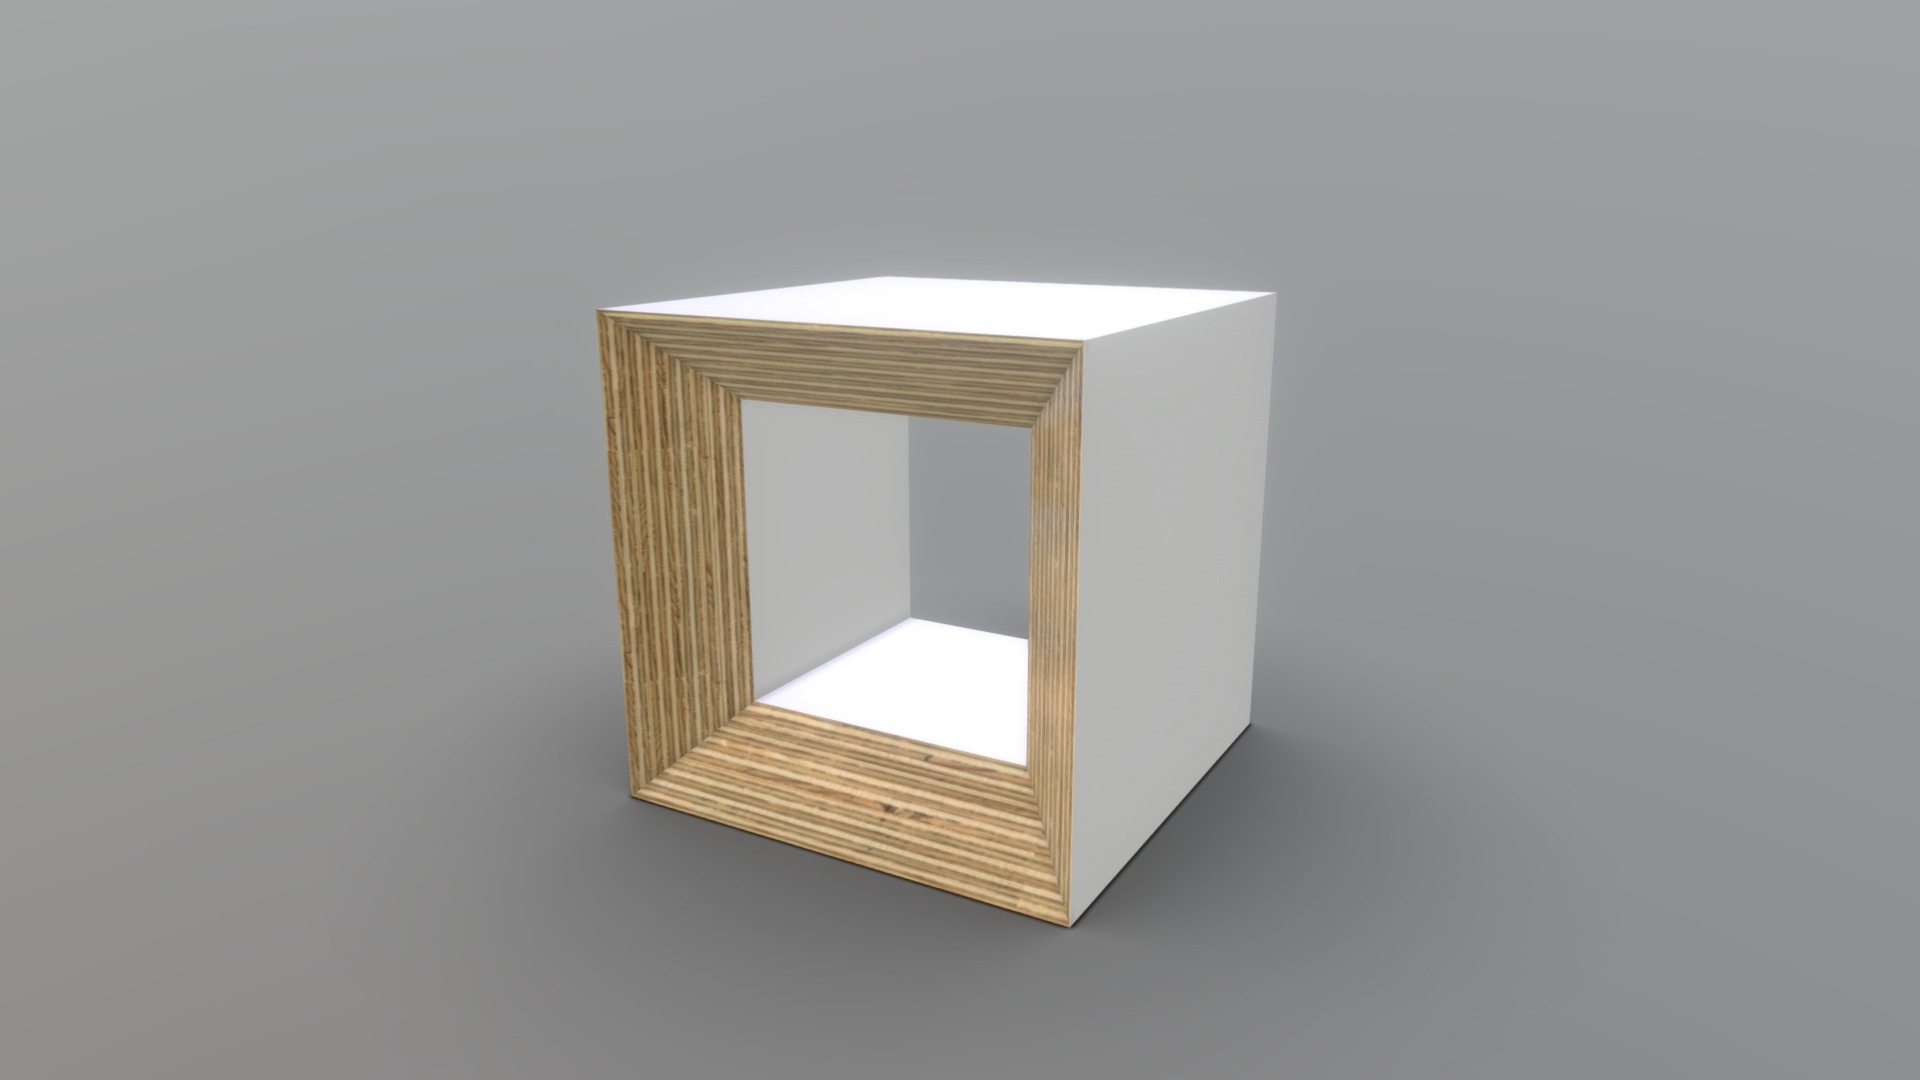 3D model JOSECHO LOPEZ LLORENS - This is a 3D model of the JOSECHO LOPEZ LLORENS. The 3D model is about a wooden frame on a white background.